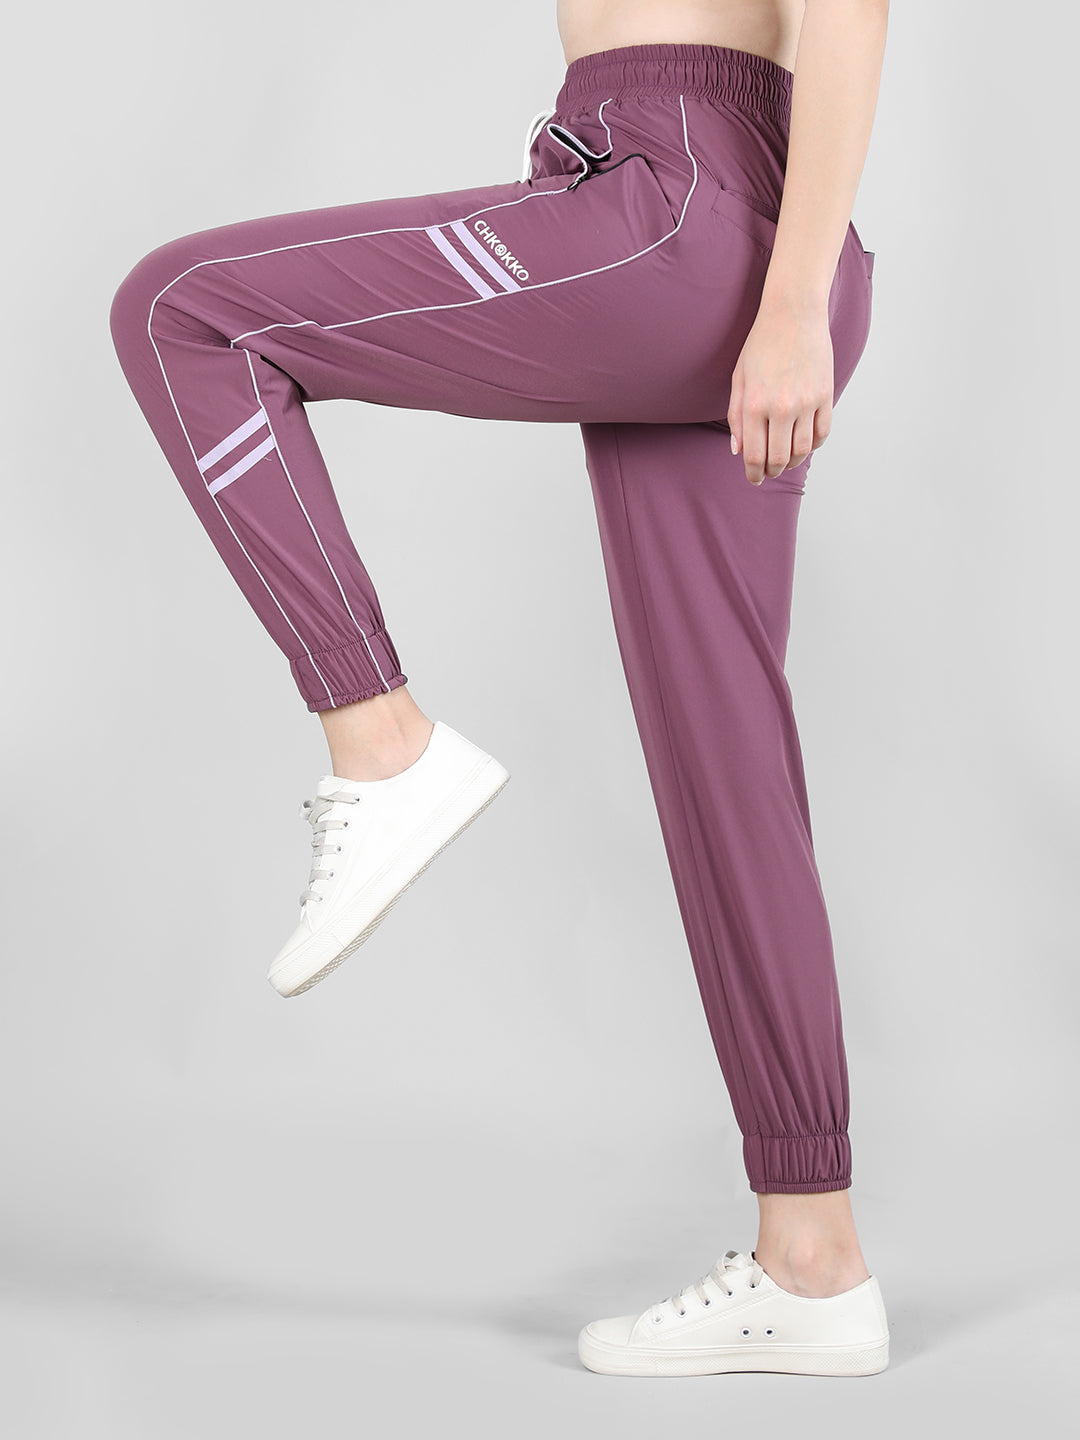 L. JOGGER PANT MII Cotton sports trousers - Made in Italy - Women - Diadora  Online Store US